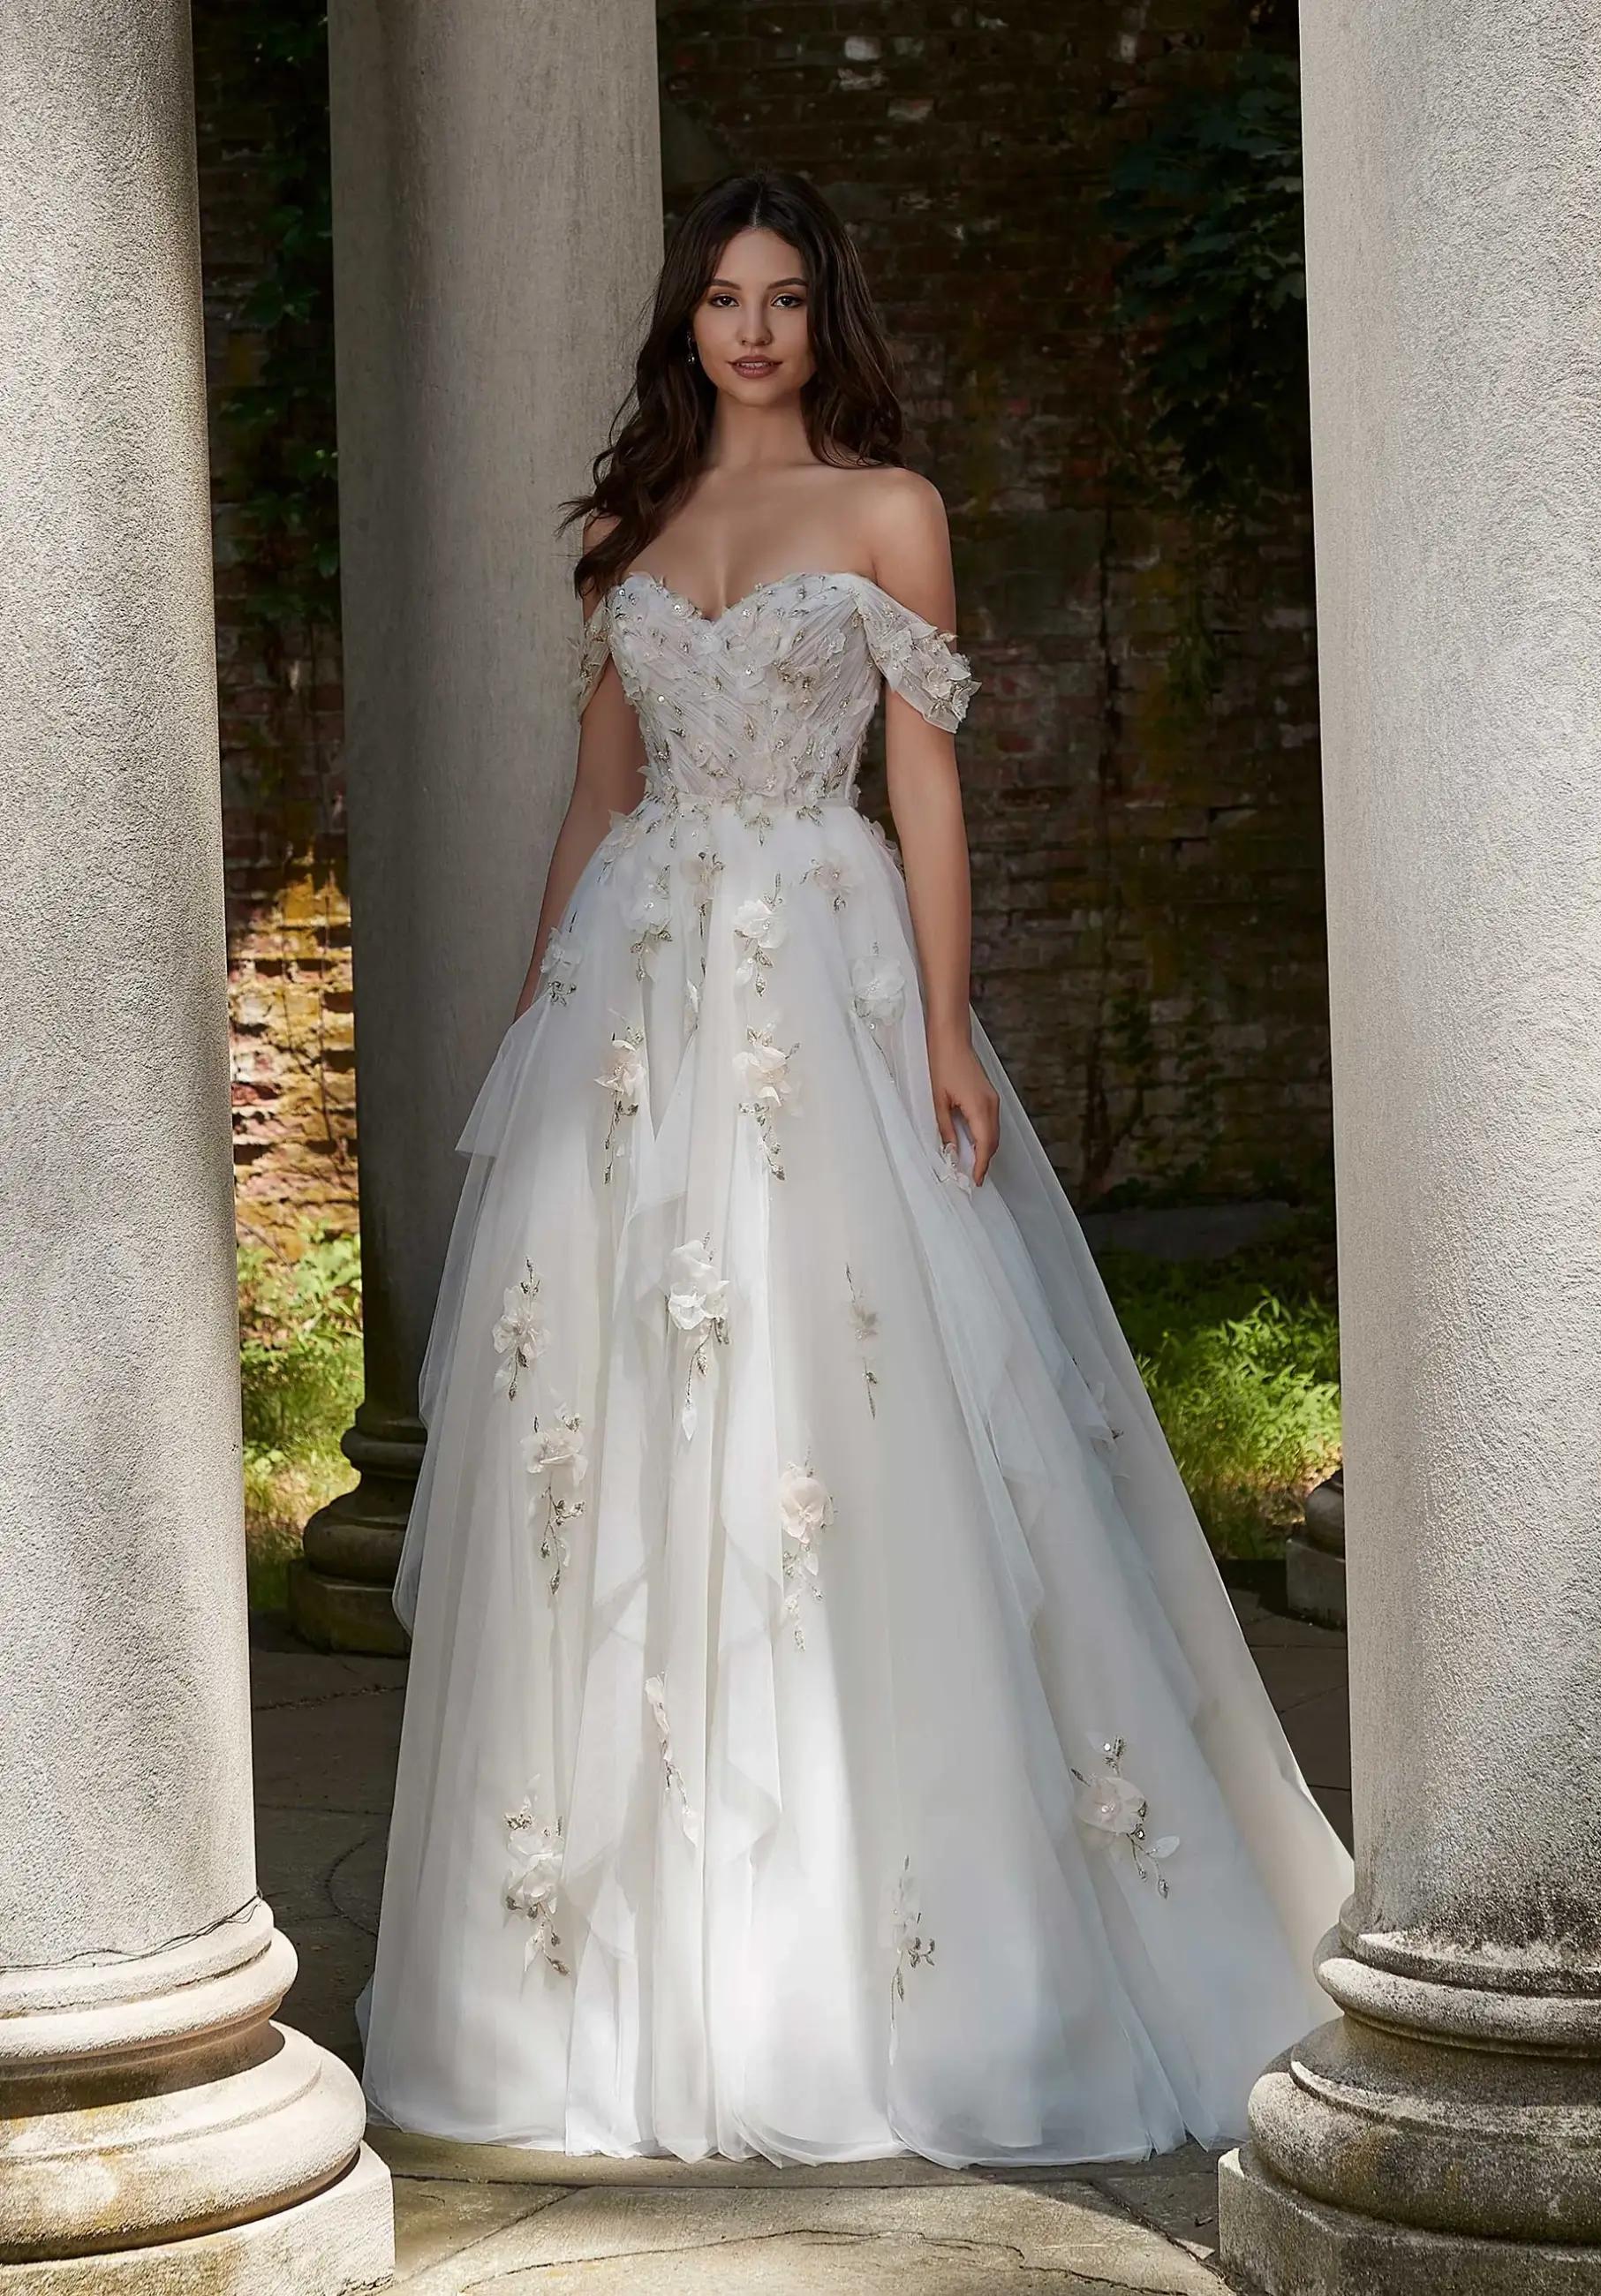 Top Morilee Wedding Dresses Available at Downtown Gown Image